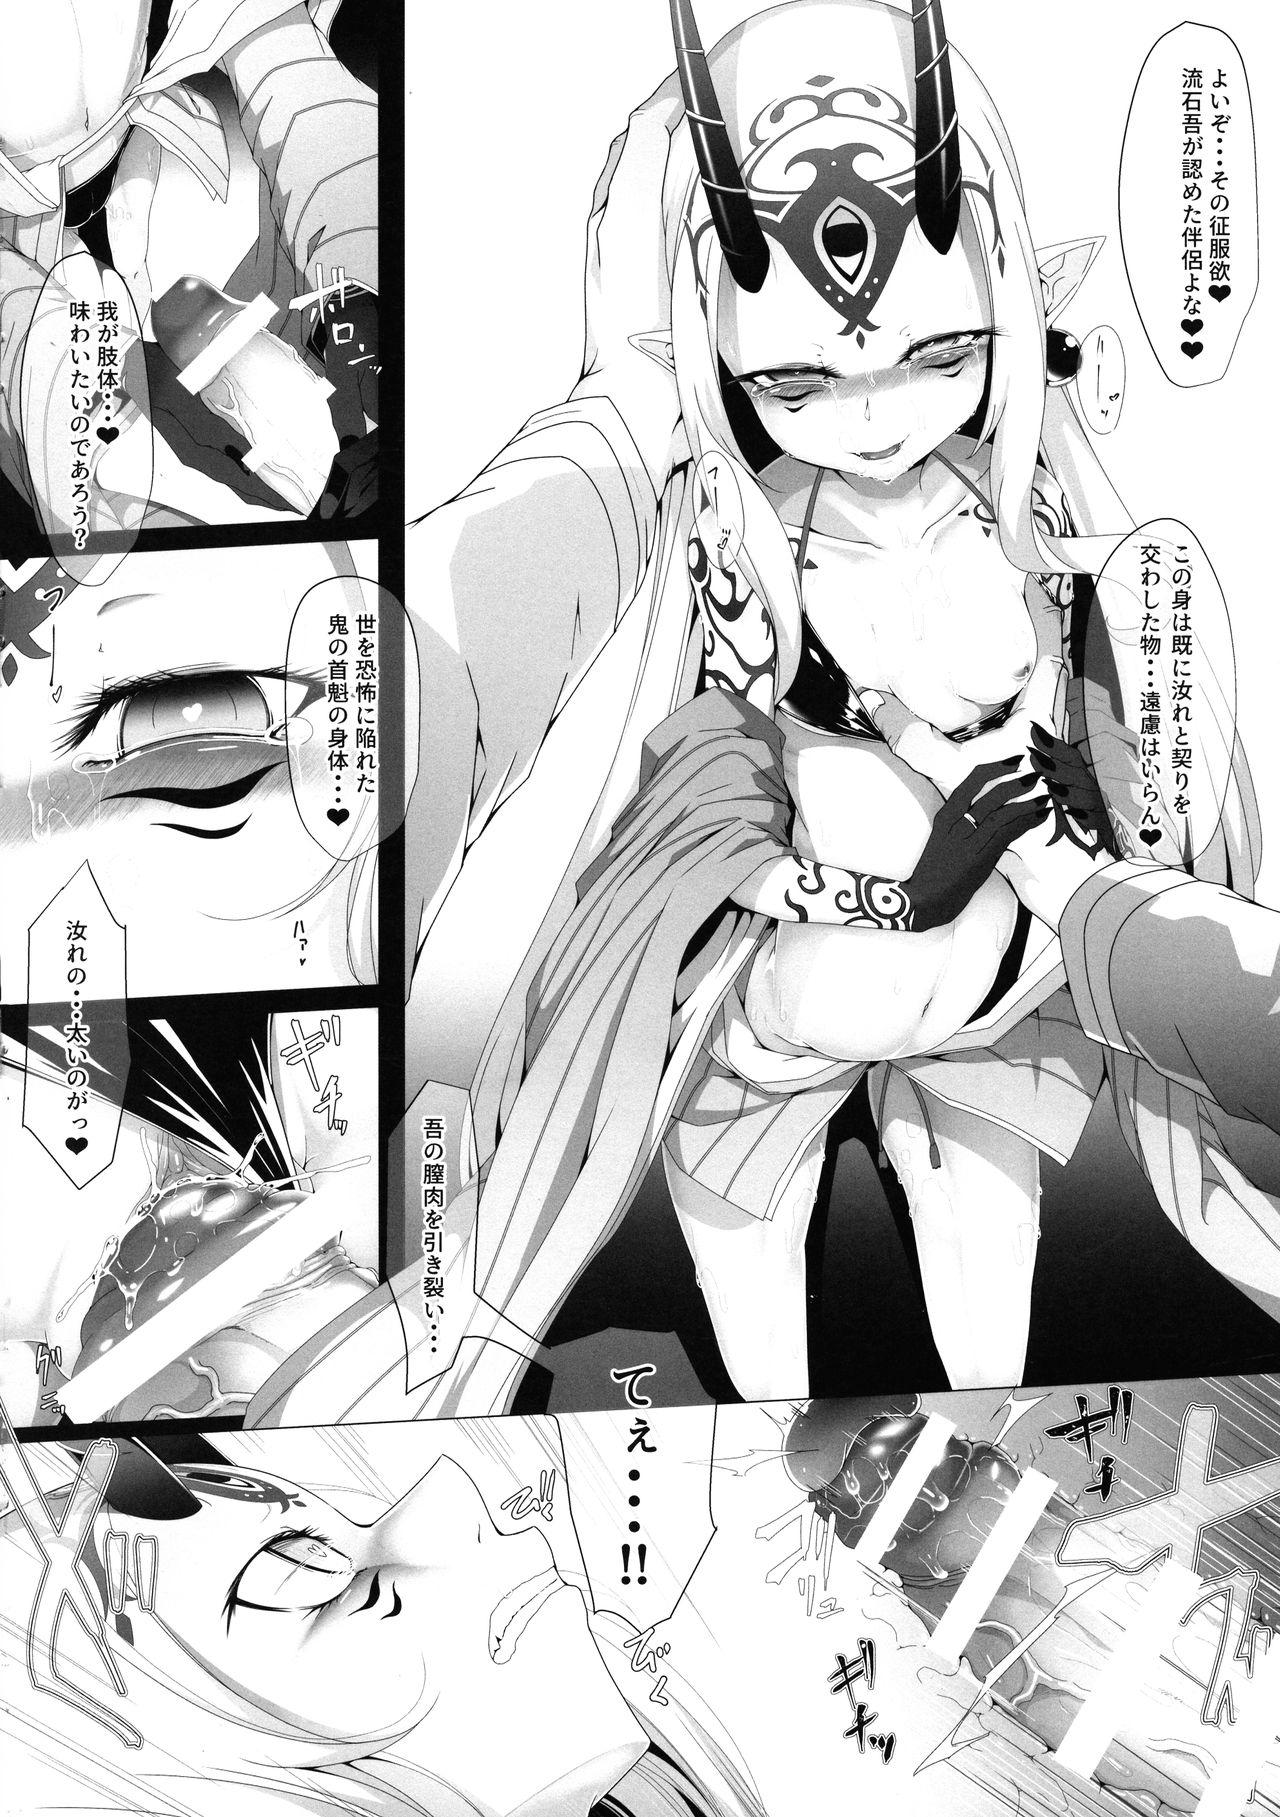 Blackwoman M.P. Vol. 20 - Fate grand order Leaked - Page 6